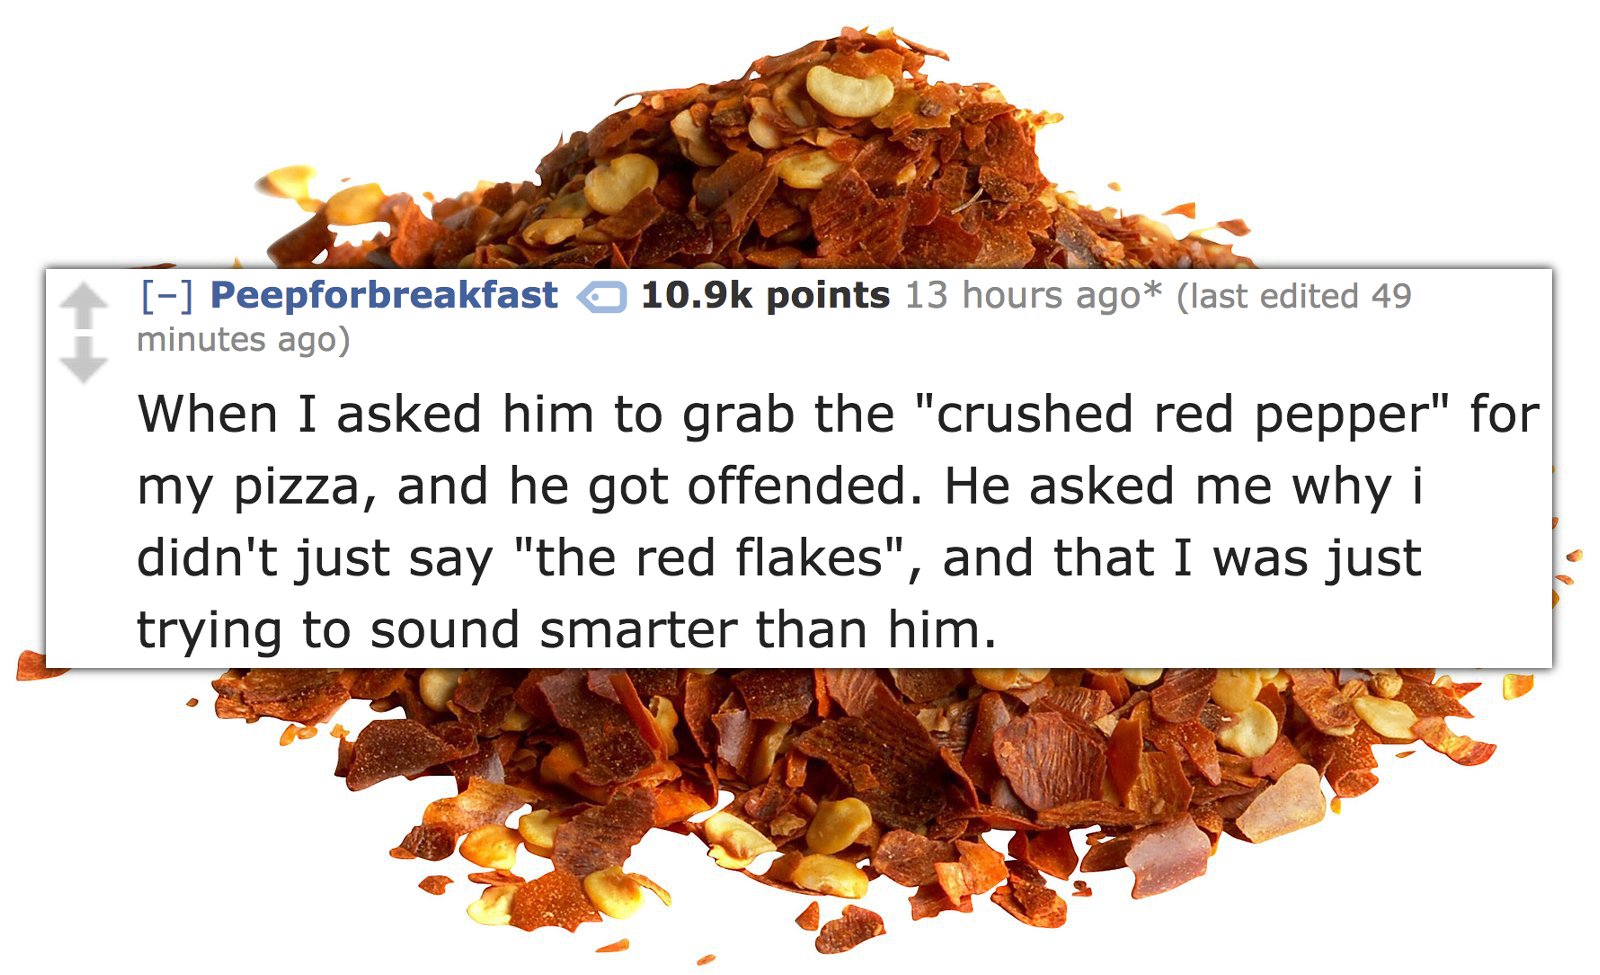 superfood - Peepforbreakfast o points 13 hours ago last edited 49 minutes ago When I asked him to grab the "crushed red pepper" for my pizza, and he got offended. He asked me why i didn't just say "the red flakes", and that I was just trying to sound smar